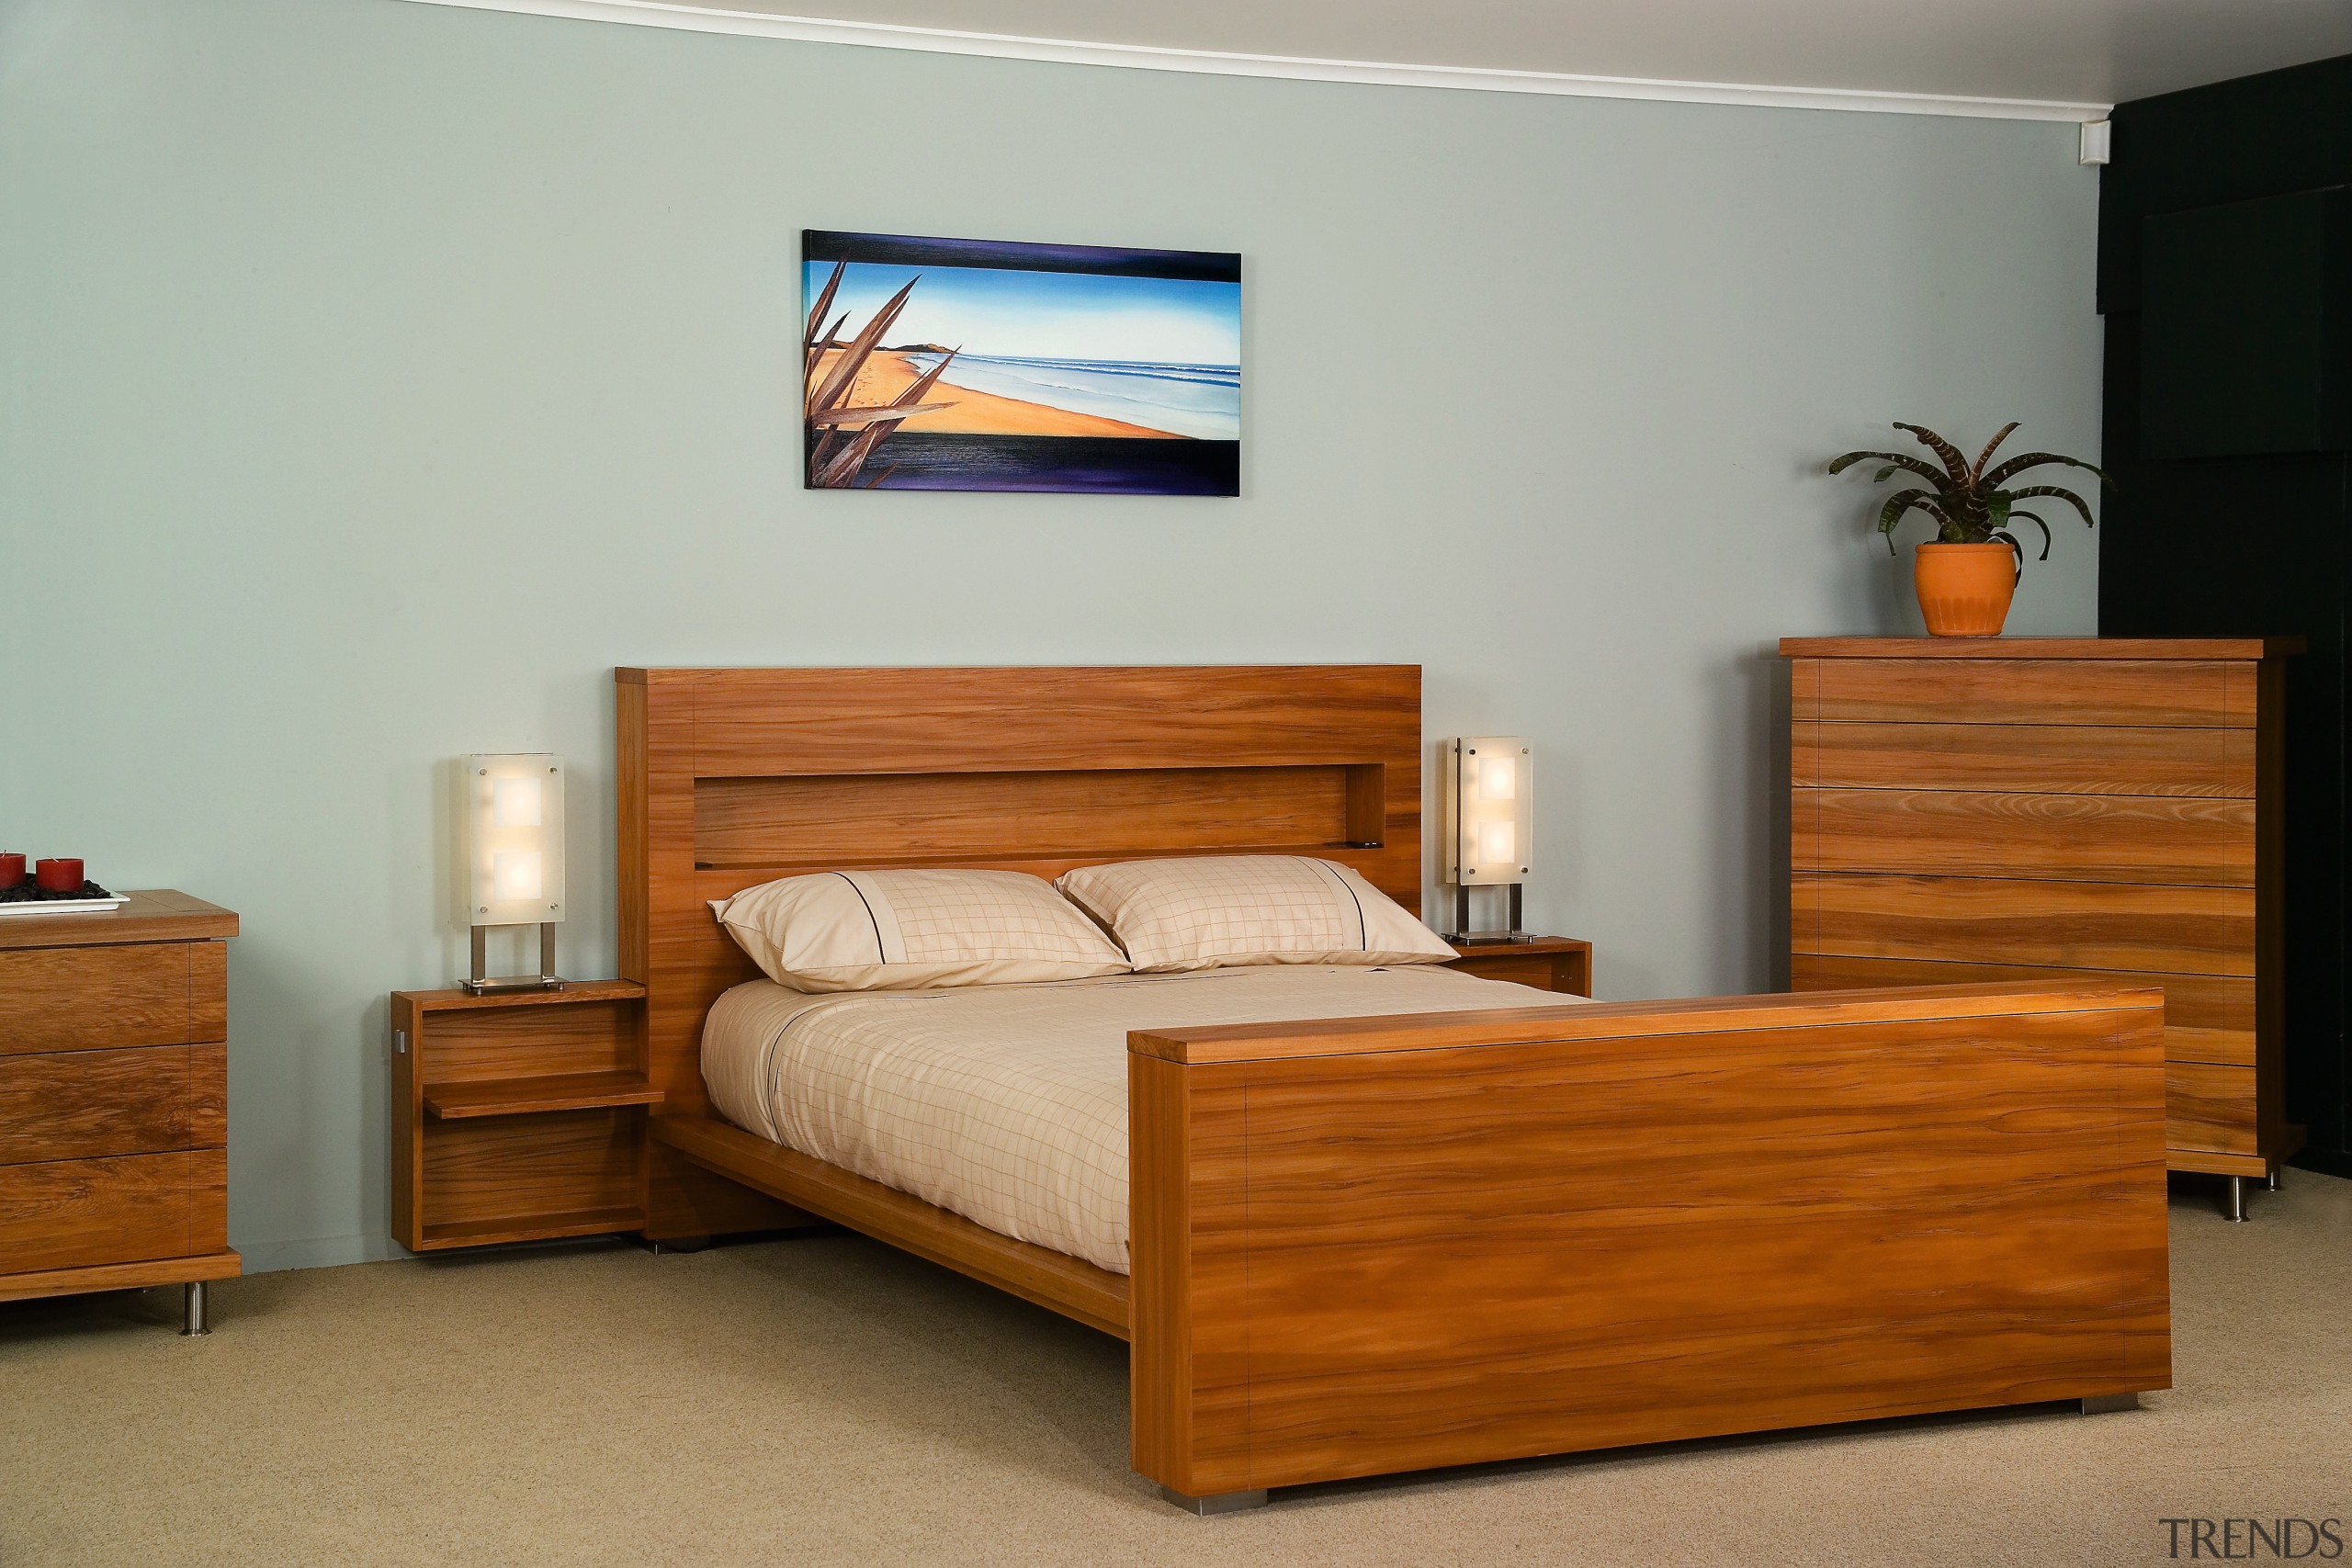 A view of some bedroom furniture from East bed, bed frame, bed sheet, bedroom, chest of drawers, drawer, floor, furniture, hardwood, interior design, mattress, nightstand, product, room, wood, gray, brown